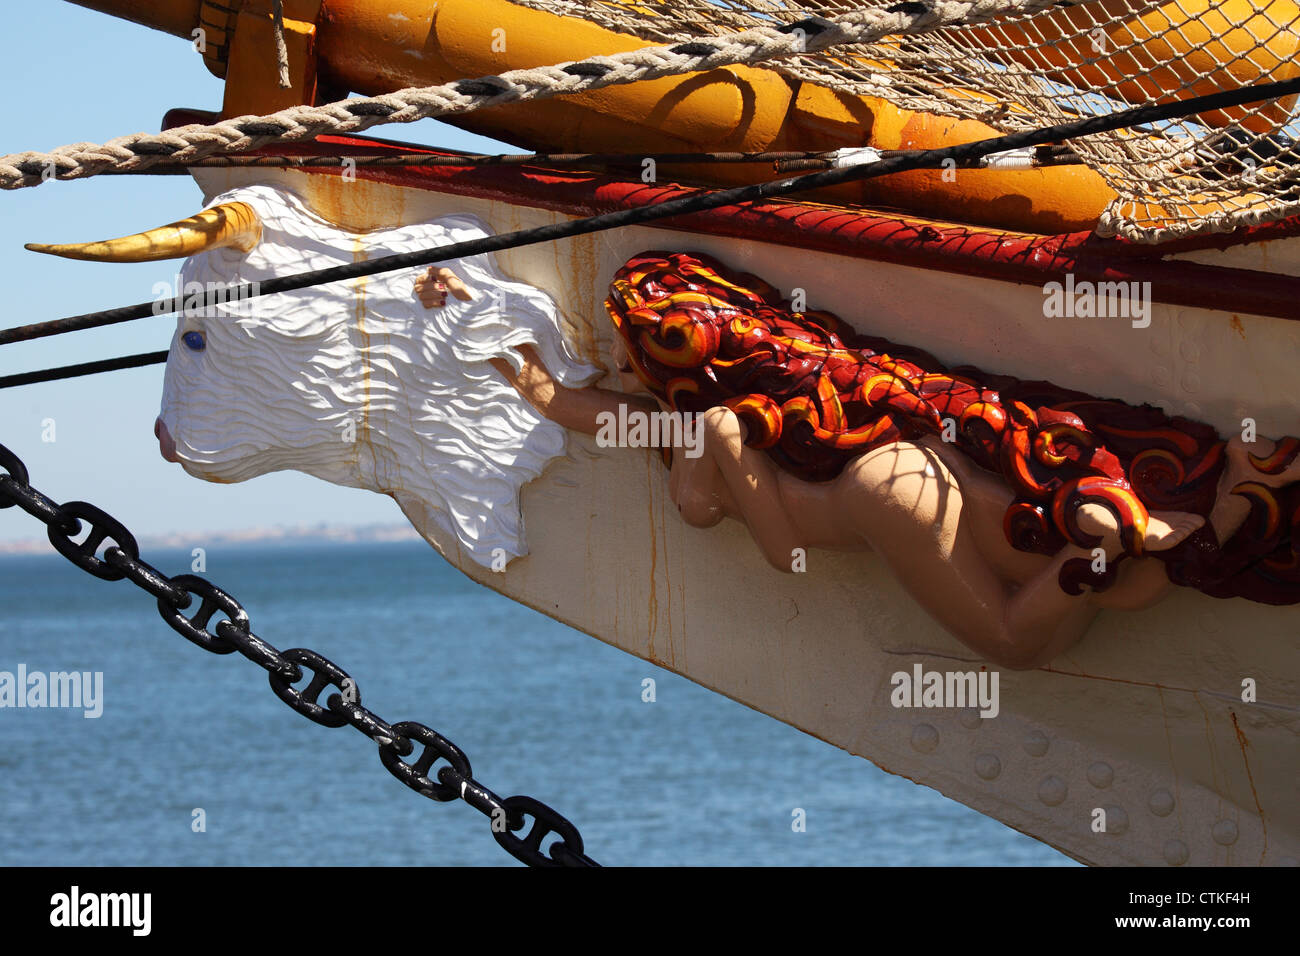 The figurehead of a tall ship. Figureheads were once seen on most sailing ships. Stock Photo